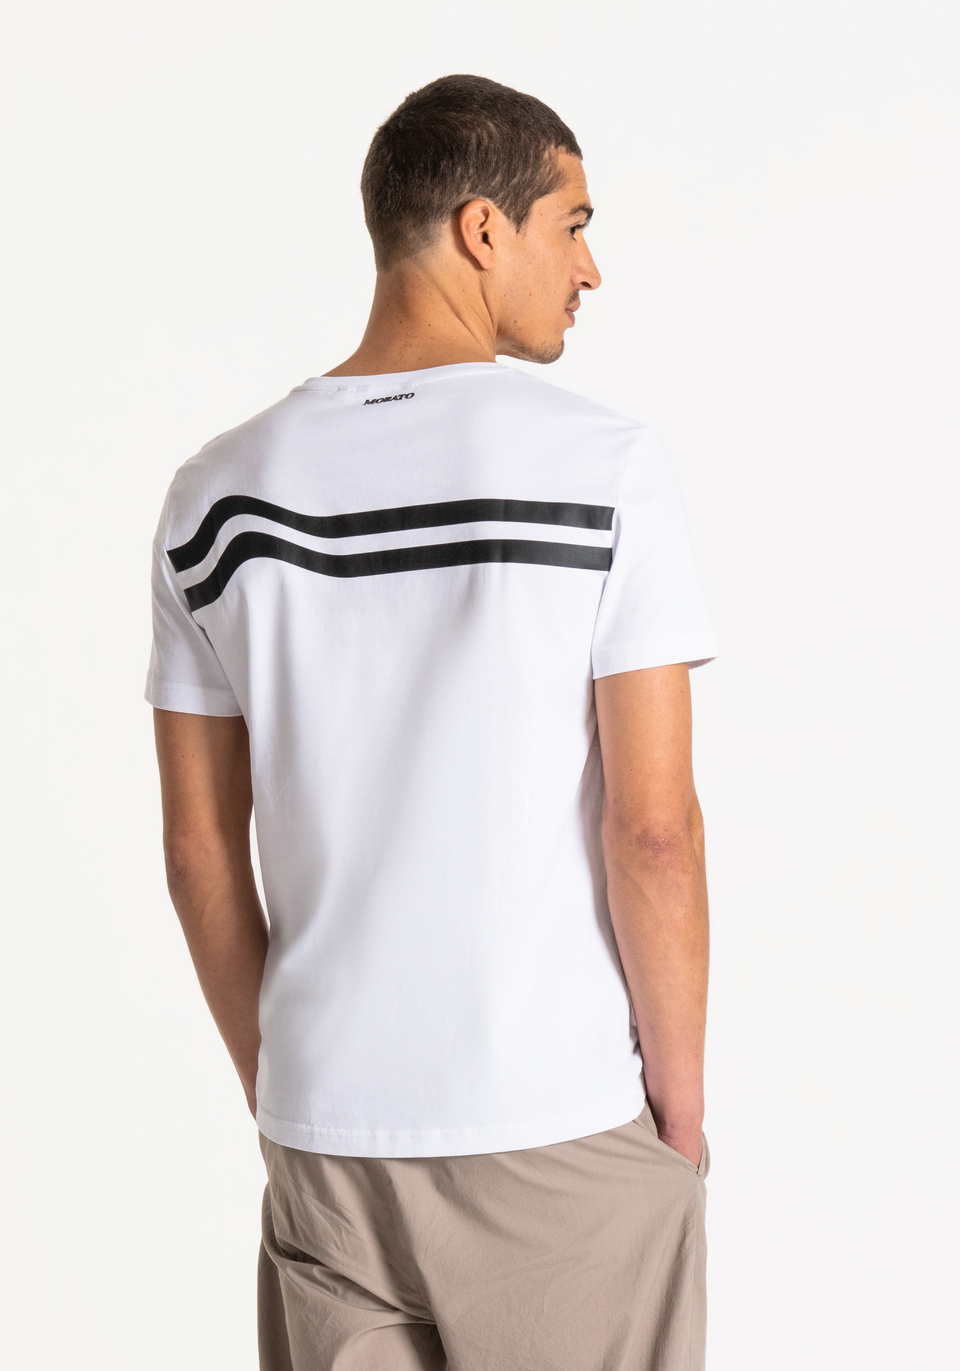 SLIM-FIT T-SHIRT IN SOFT COTTON WITH PRINT ON FRONT AND BACK - Antony Morato Online Shop